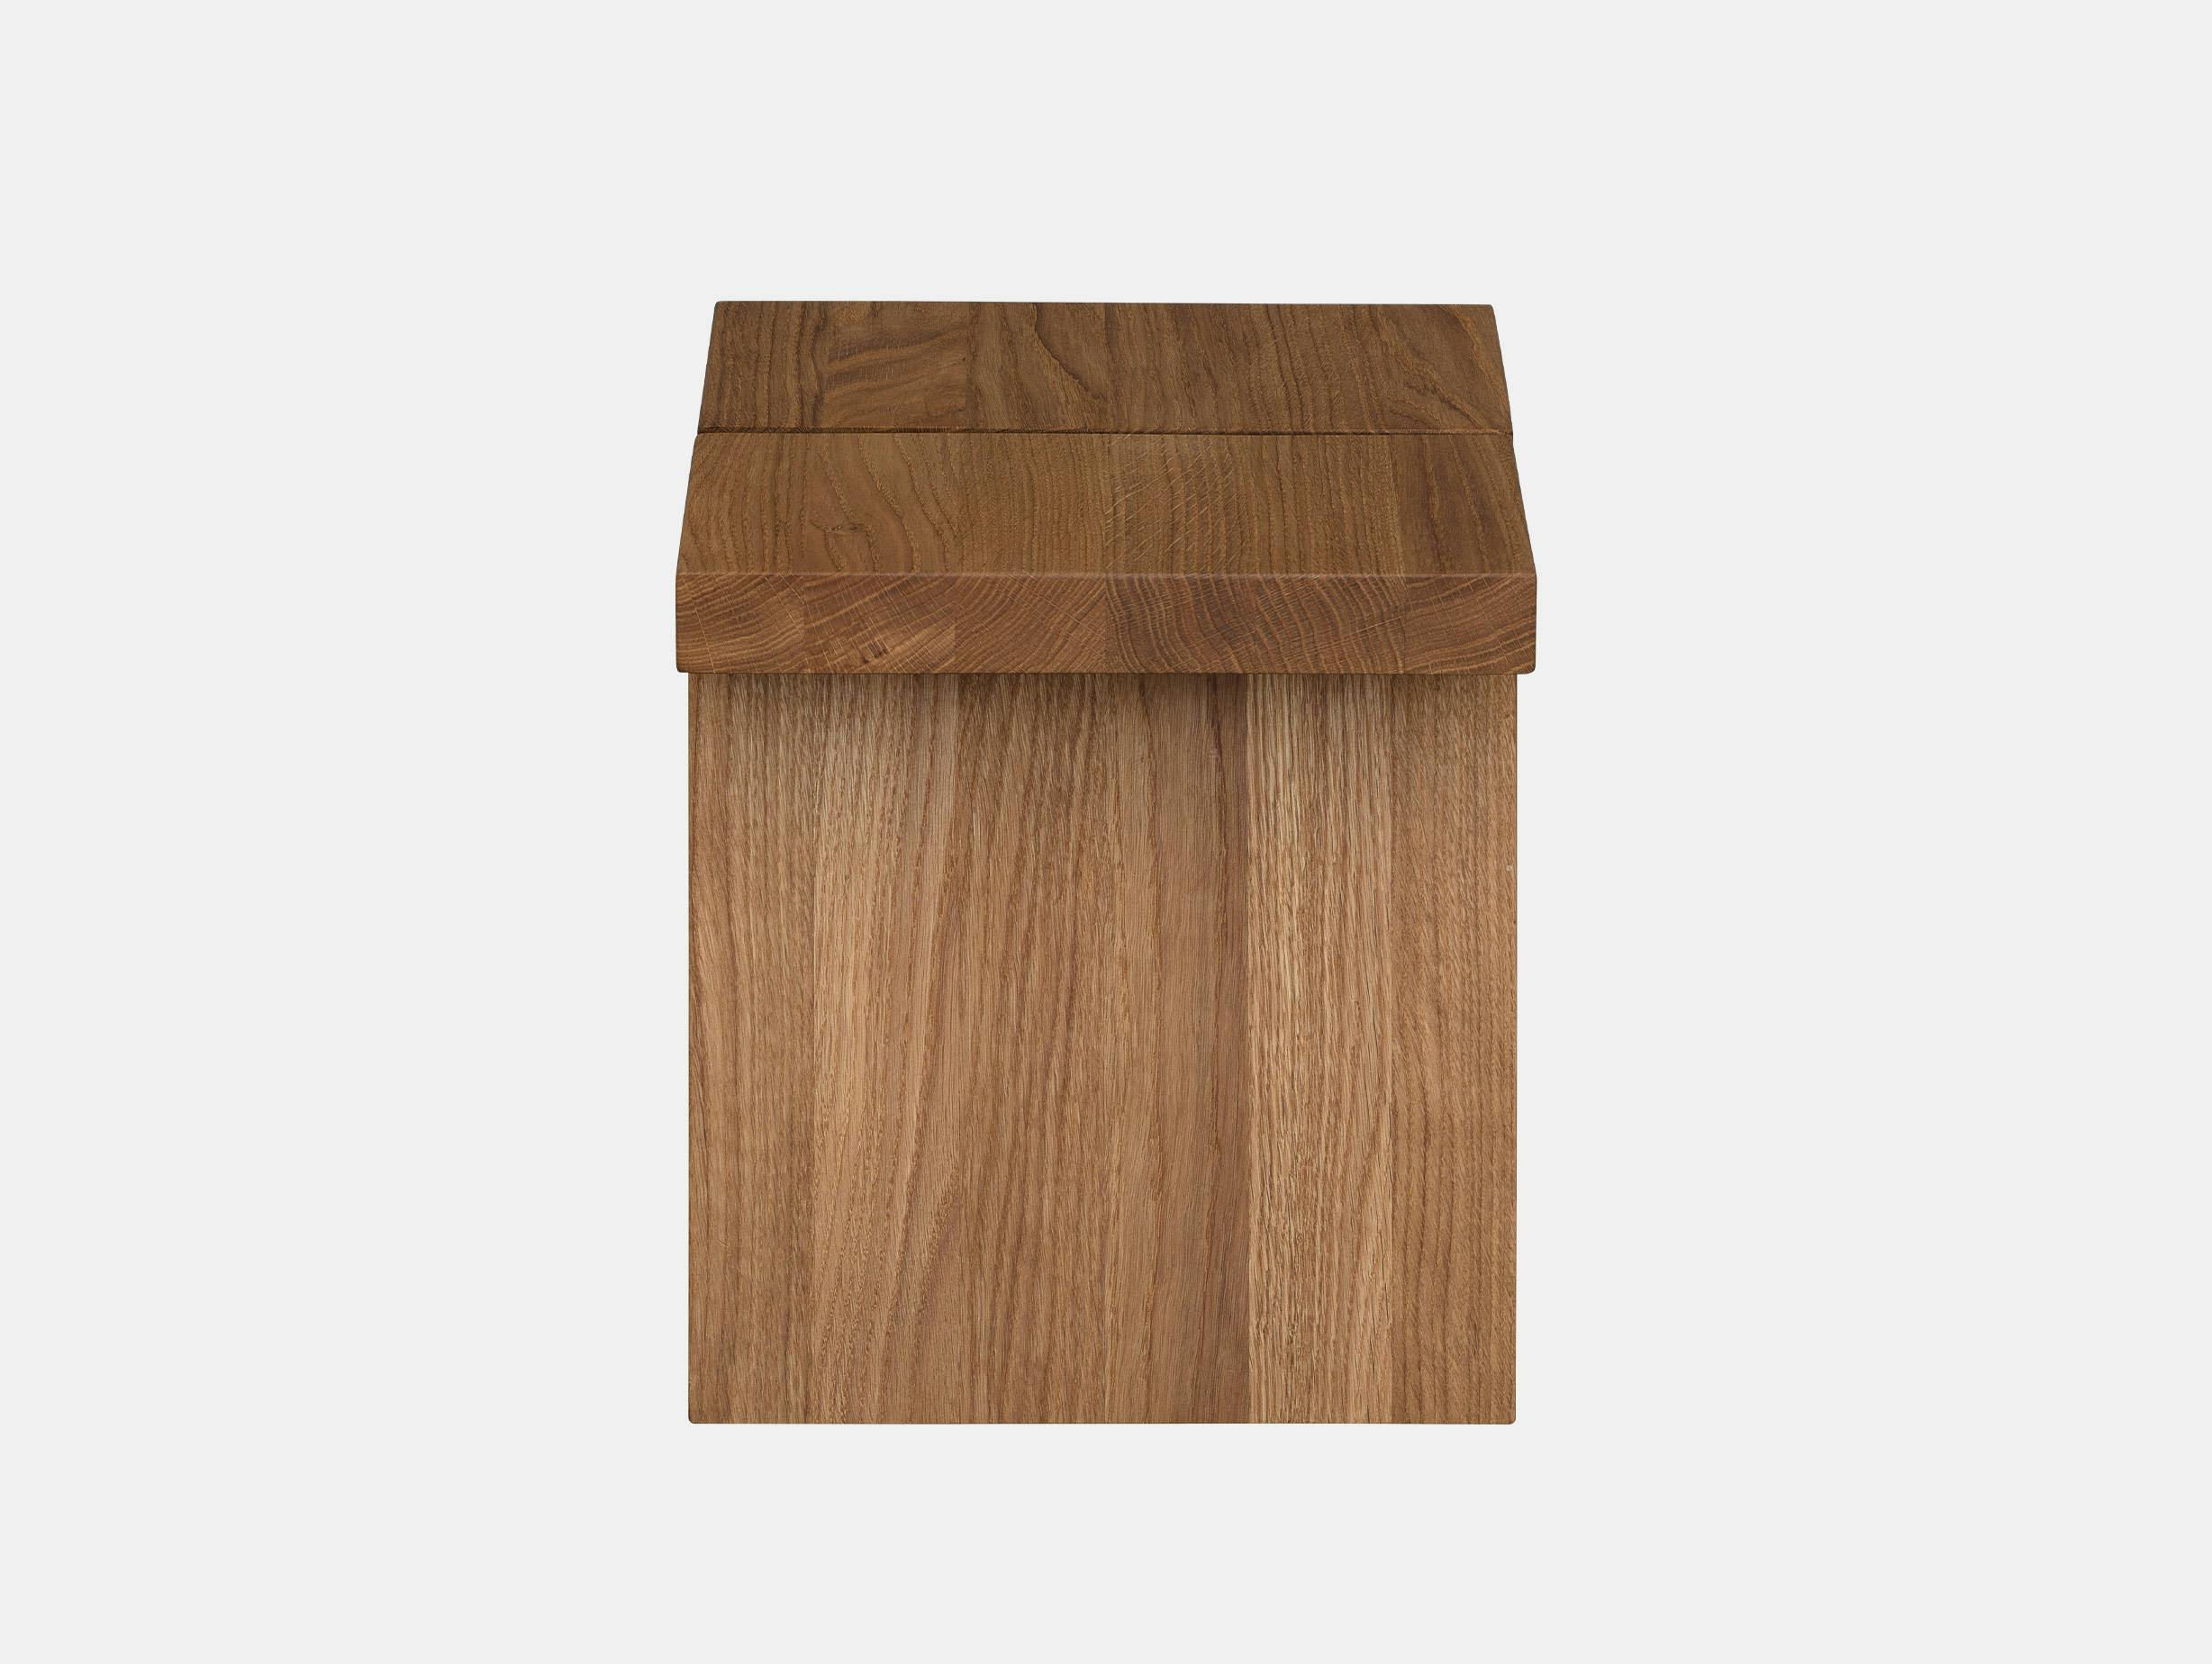 Fogia supersolid object 1 oak stool 2